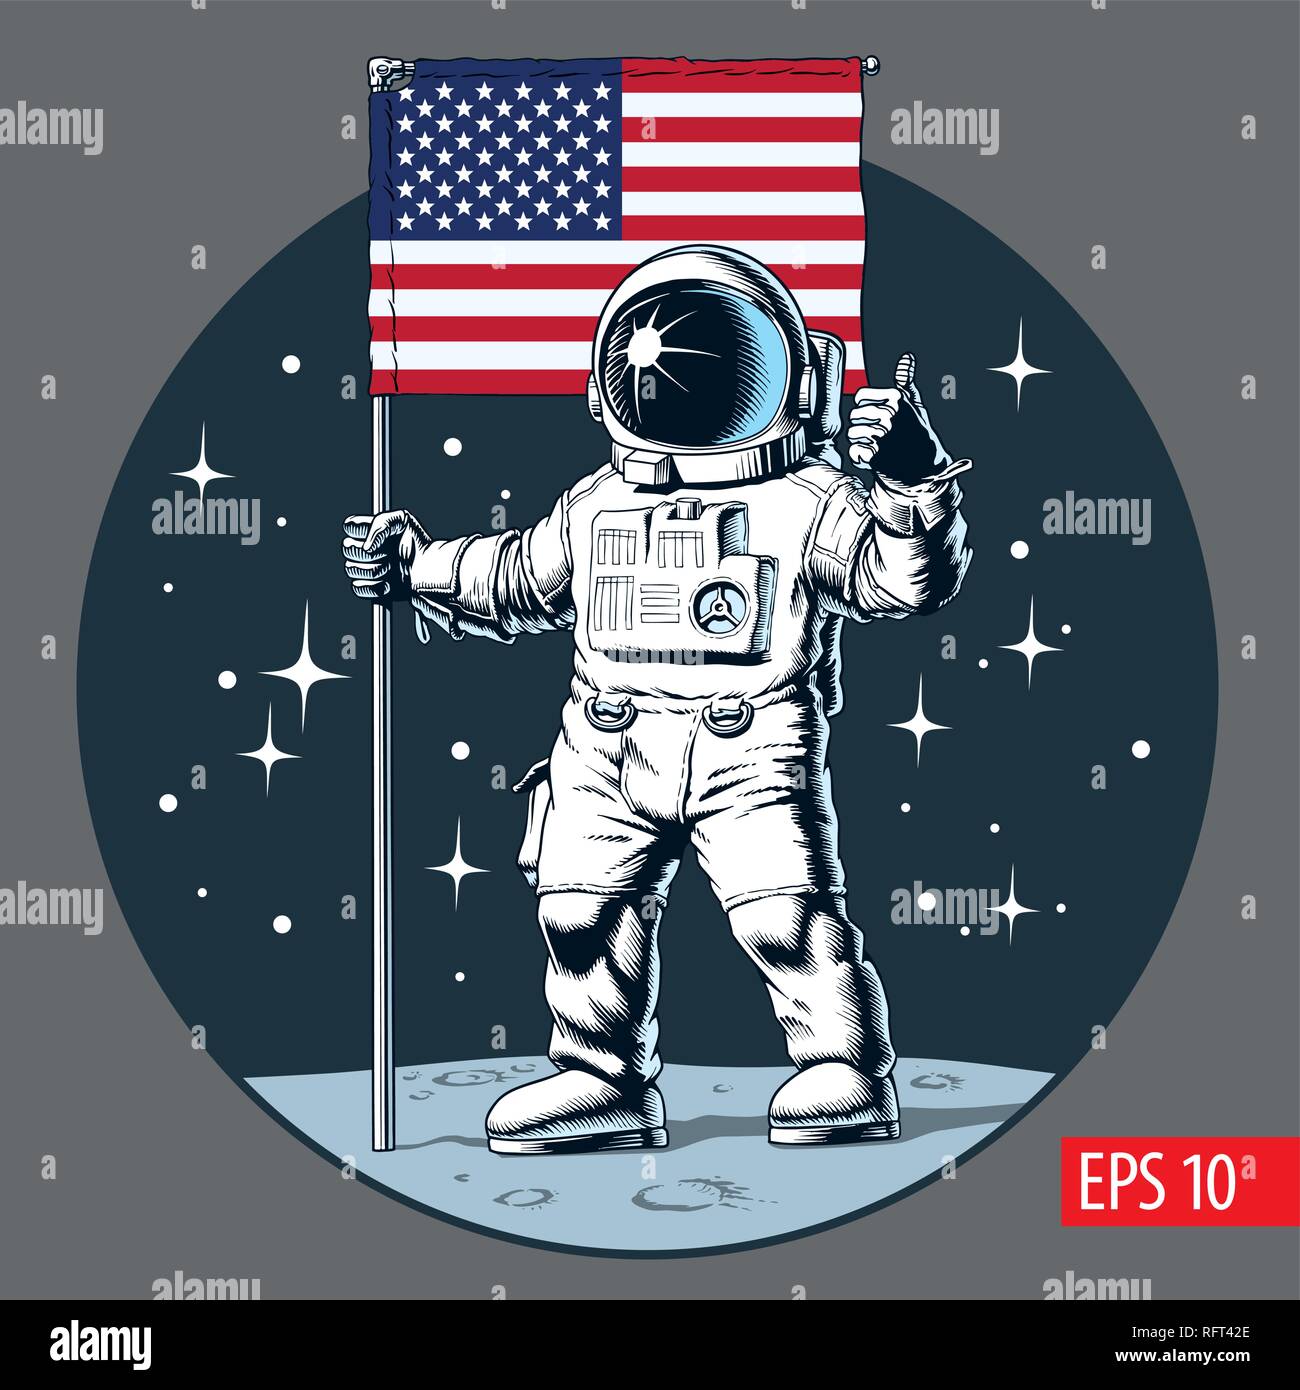 Astronaut with american flag stands on moon. Comic style vector illustration. Stock Vector